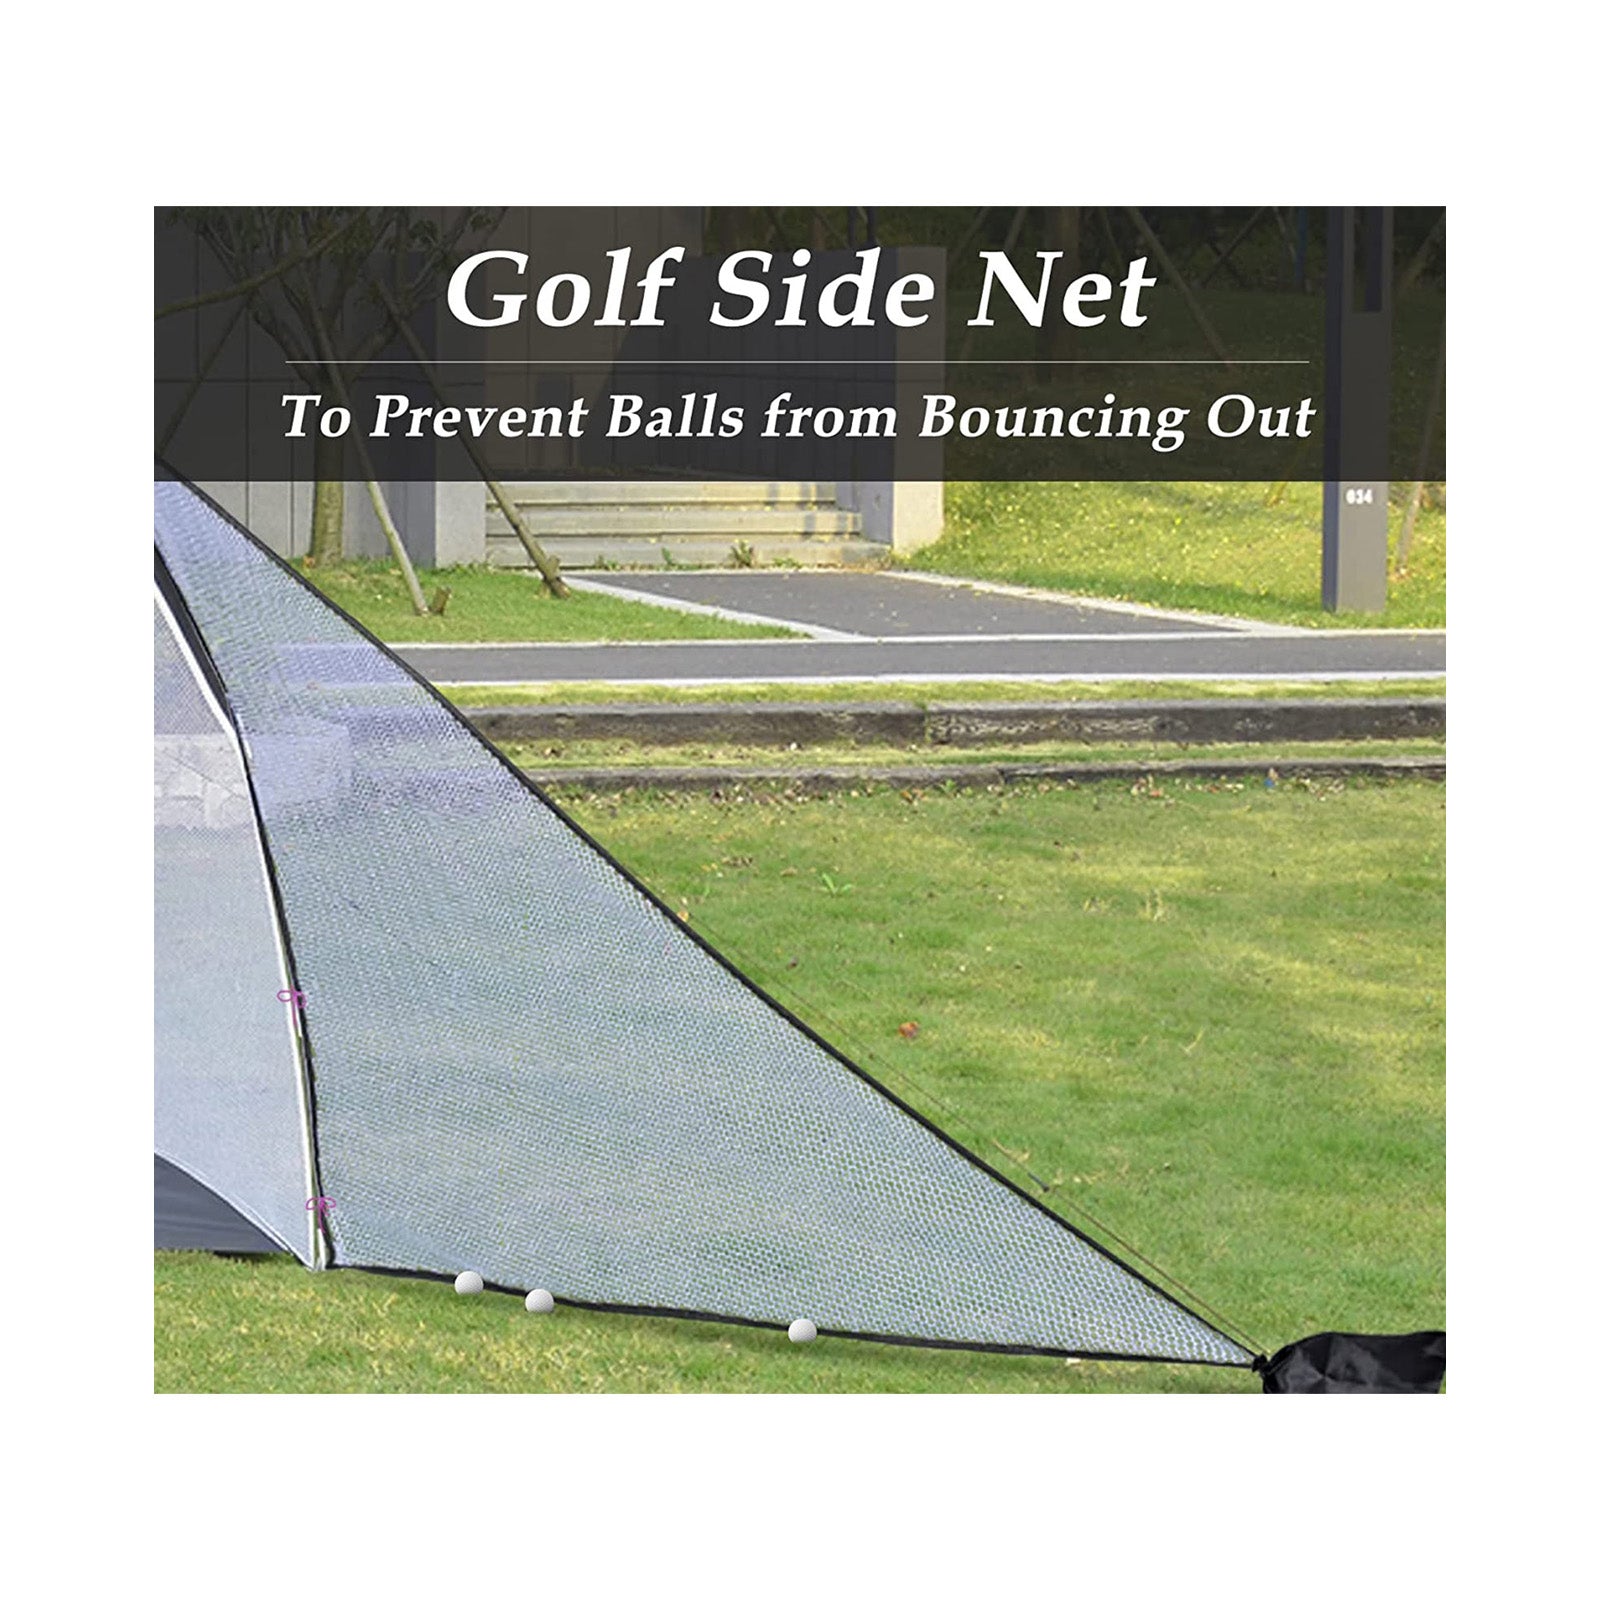 Golf Hitting Net System,Golf Backyard Driving Range,Portable Golf Net with Roof and Barrier Net,10x7x6FT(White)